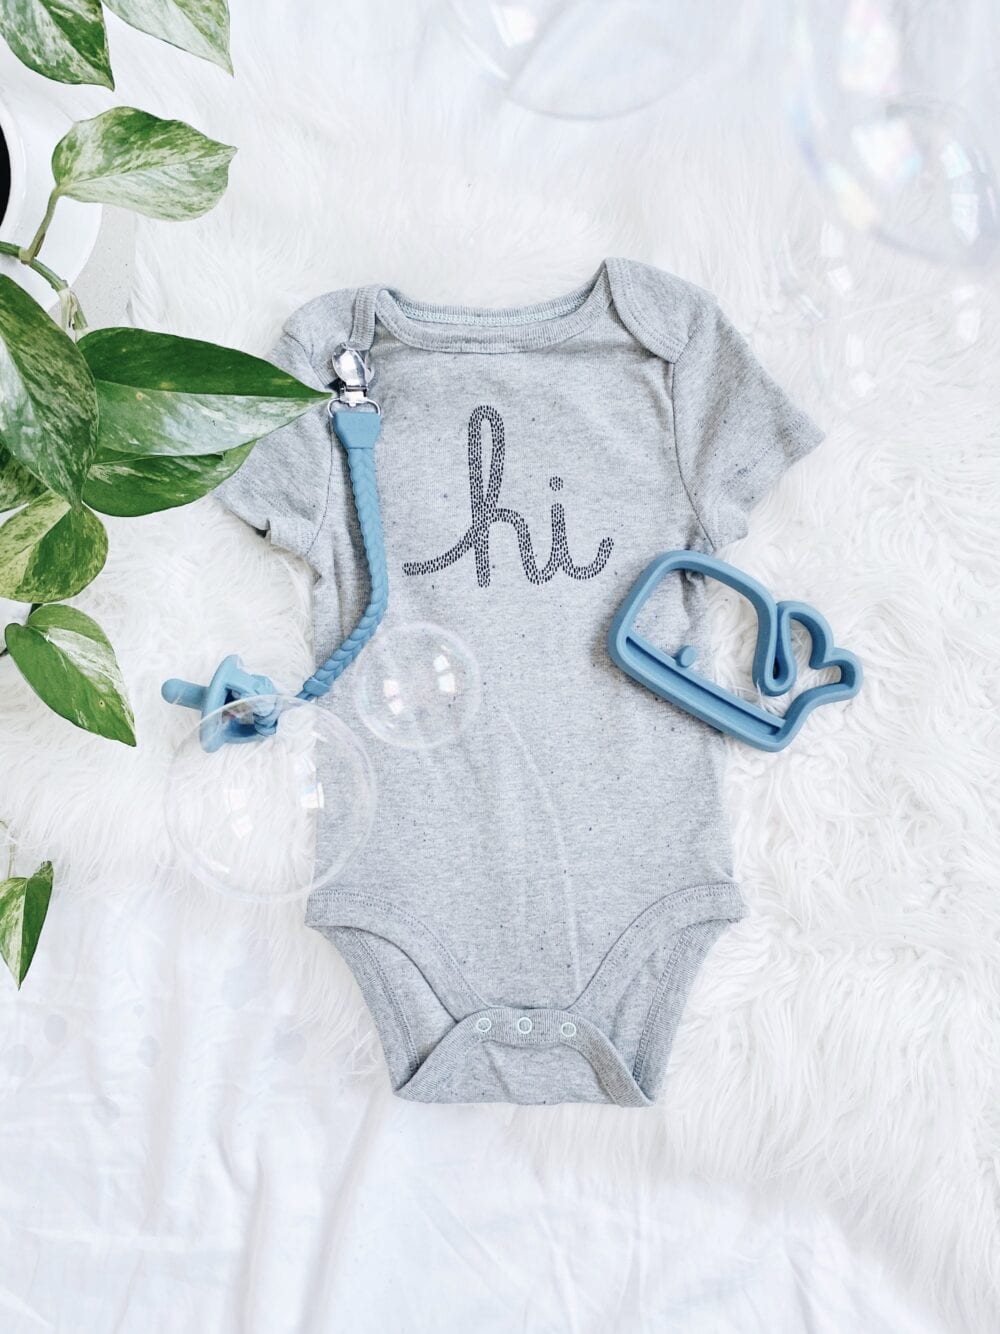 A baby's bodysuit with the word hi on it.